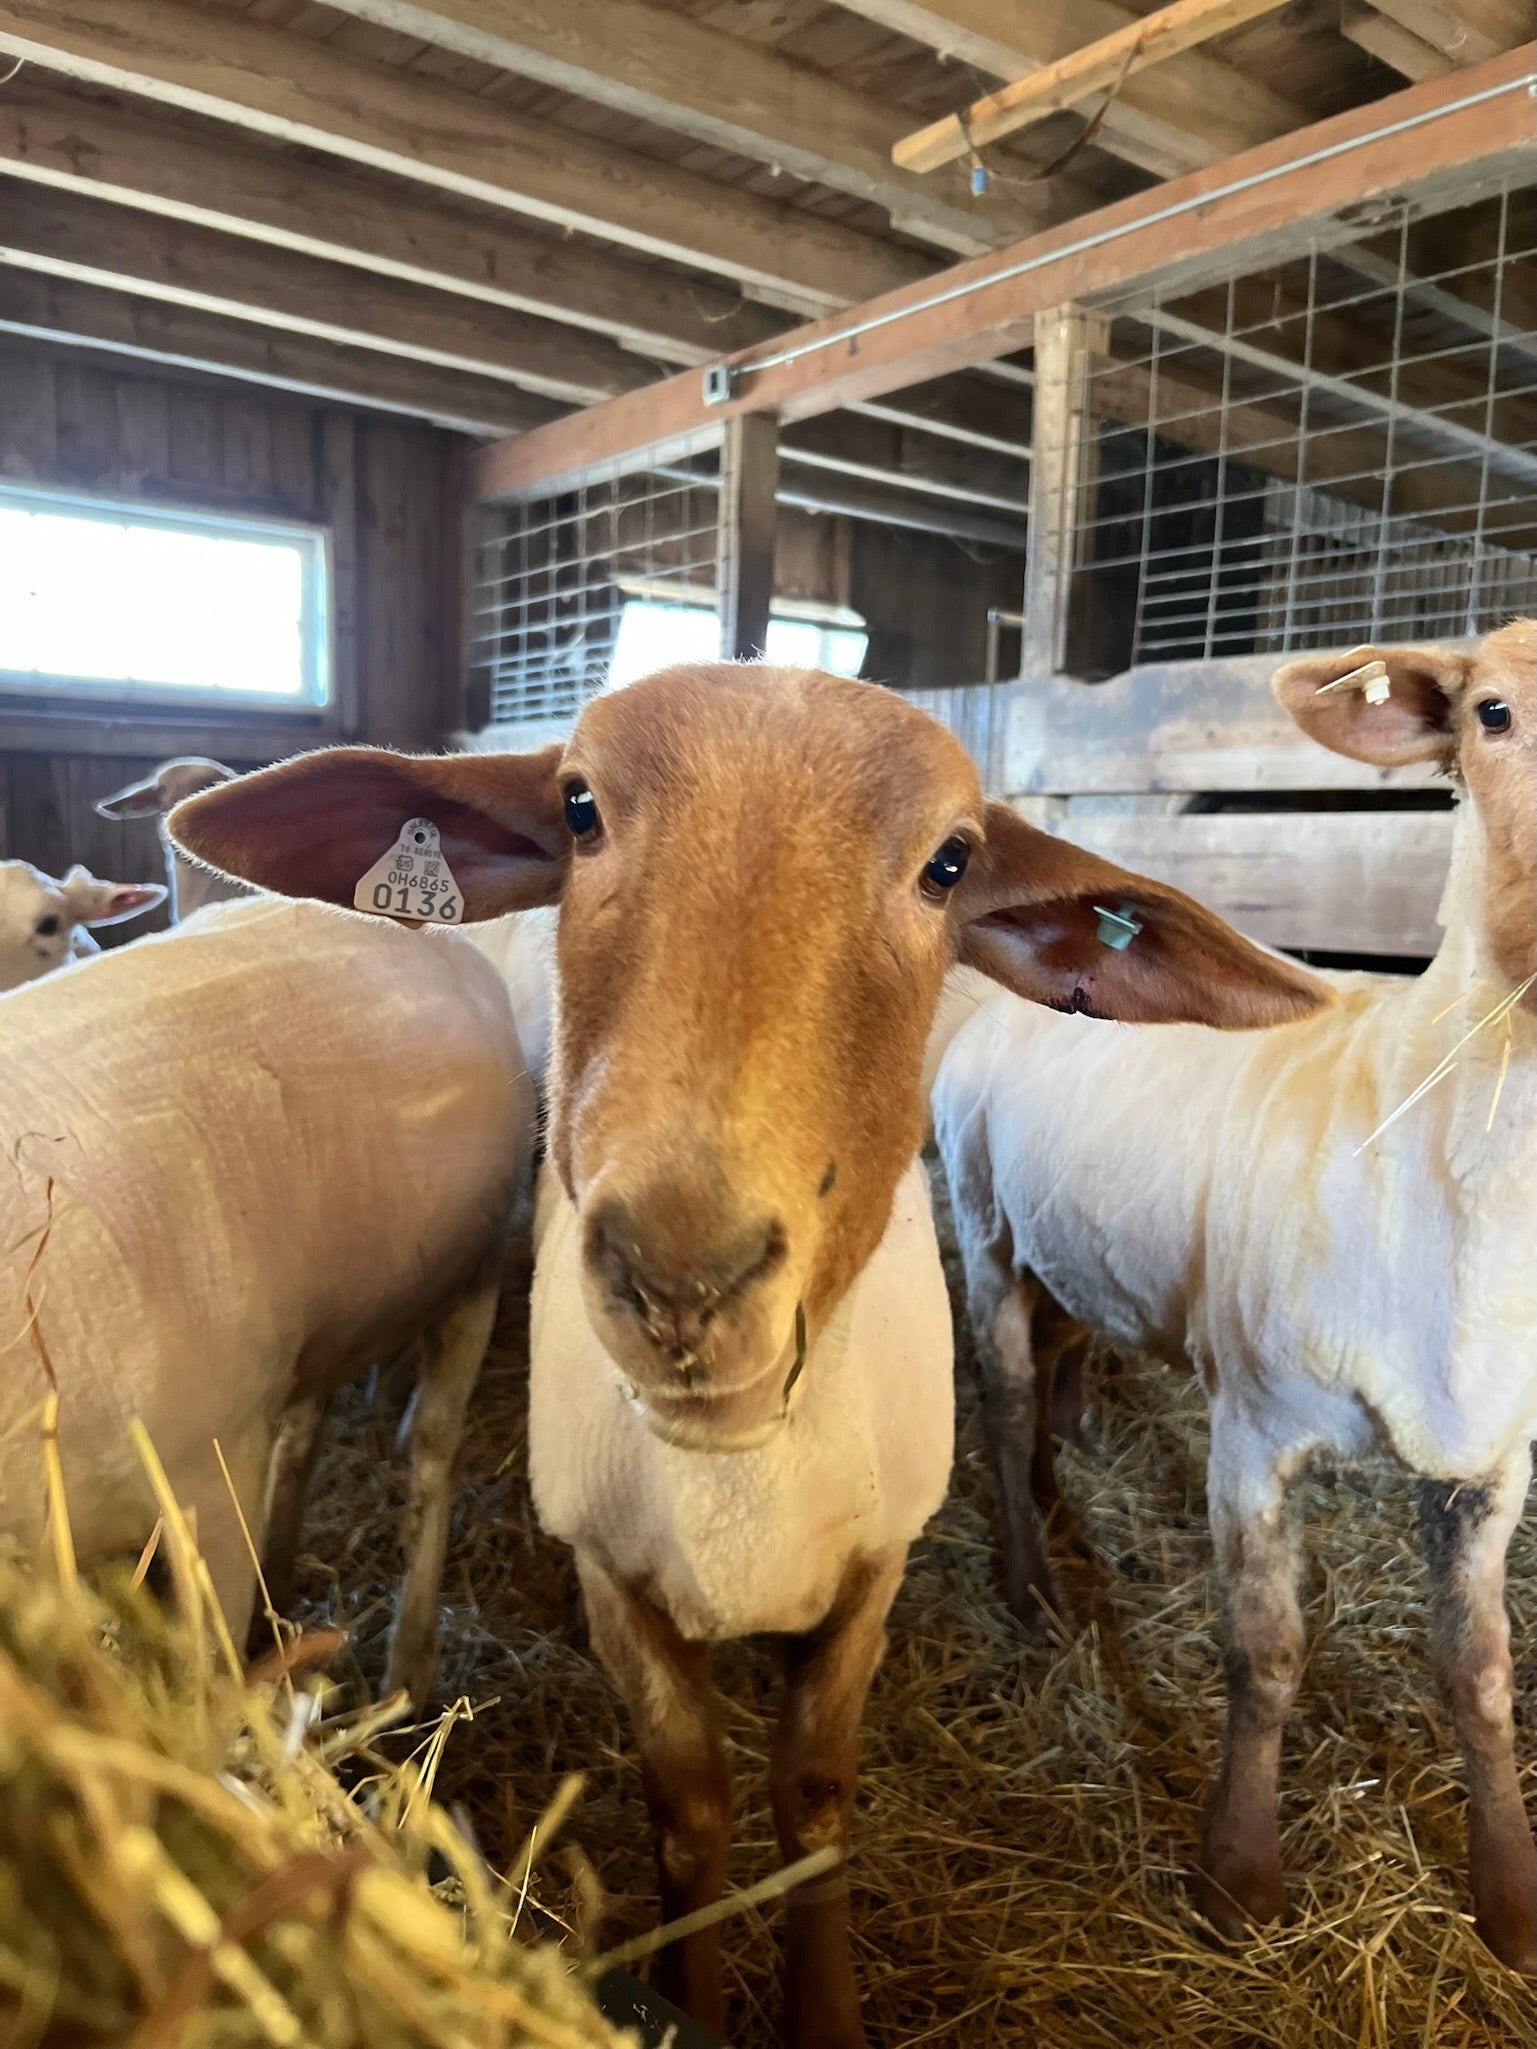 Meet our Tunis sheep flock when you visit during the Dye Retreat!